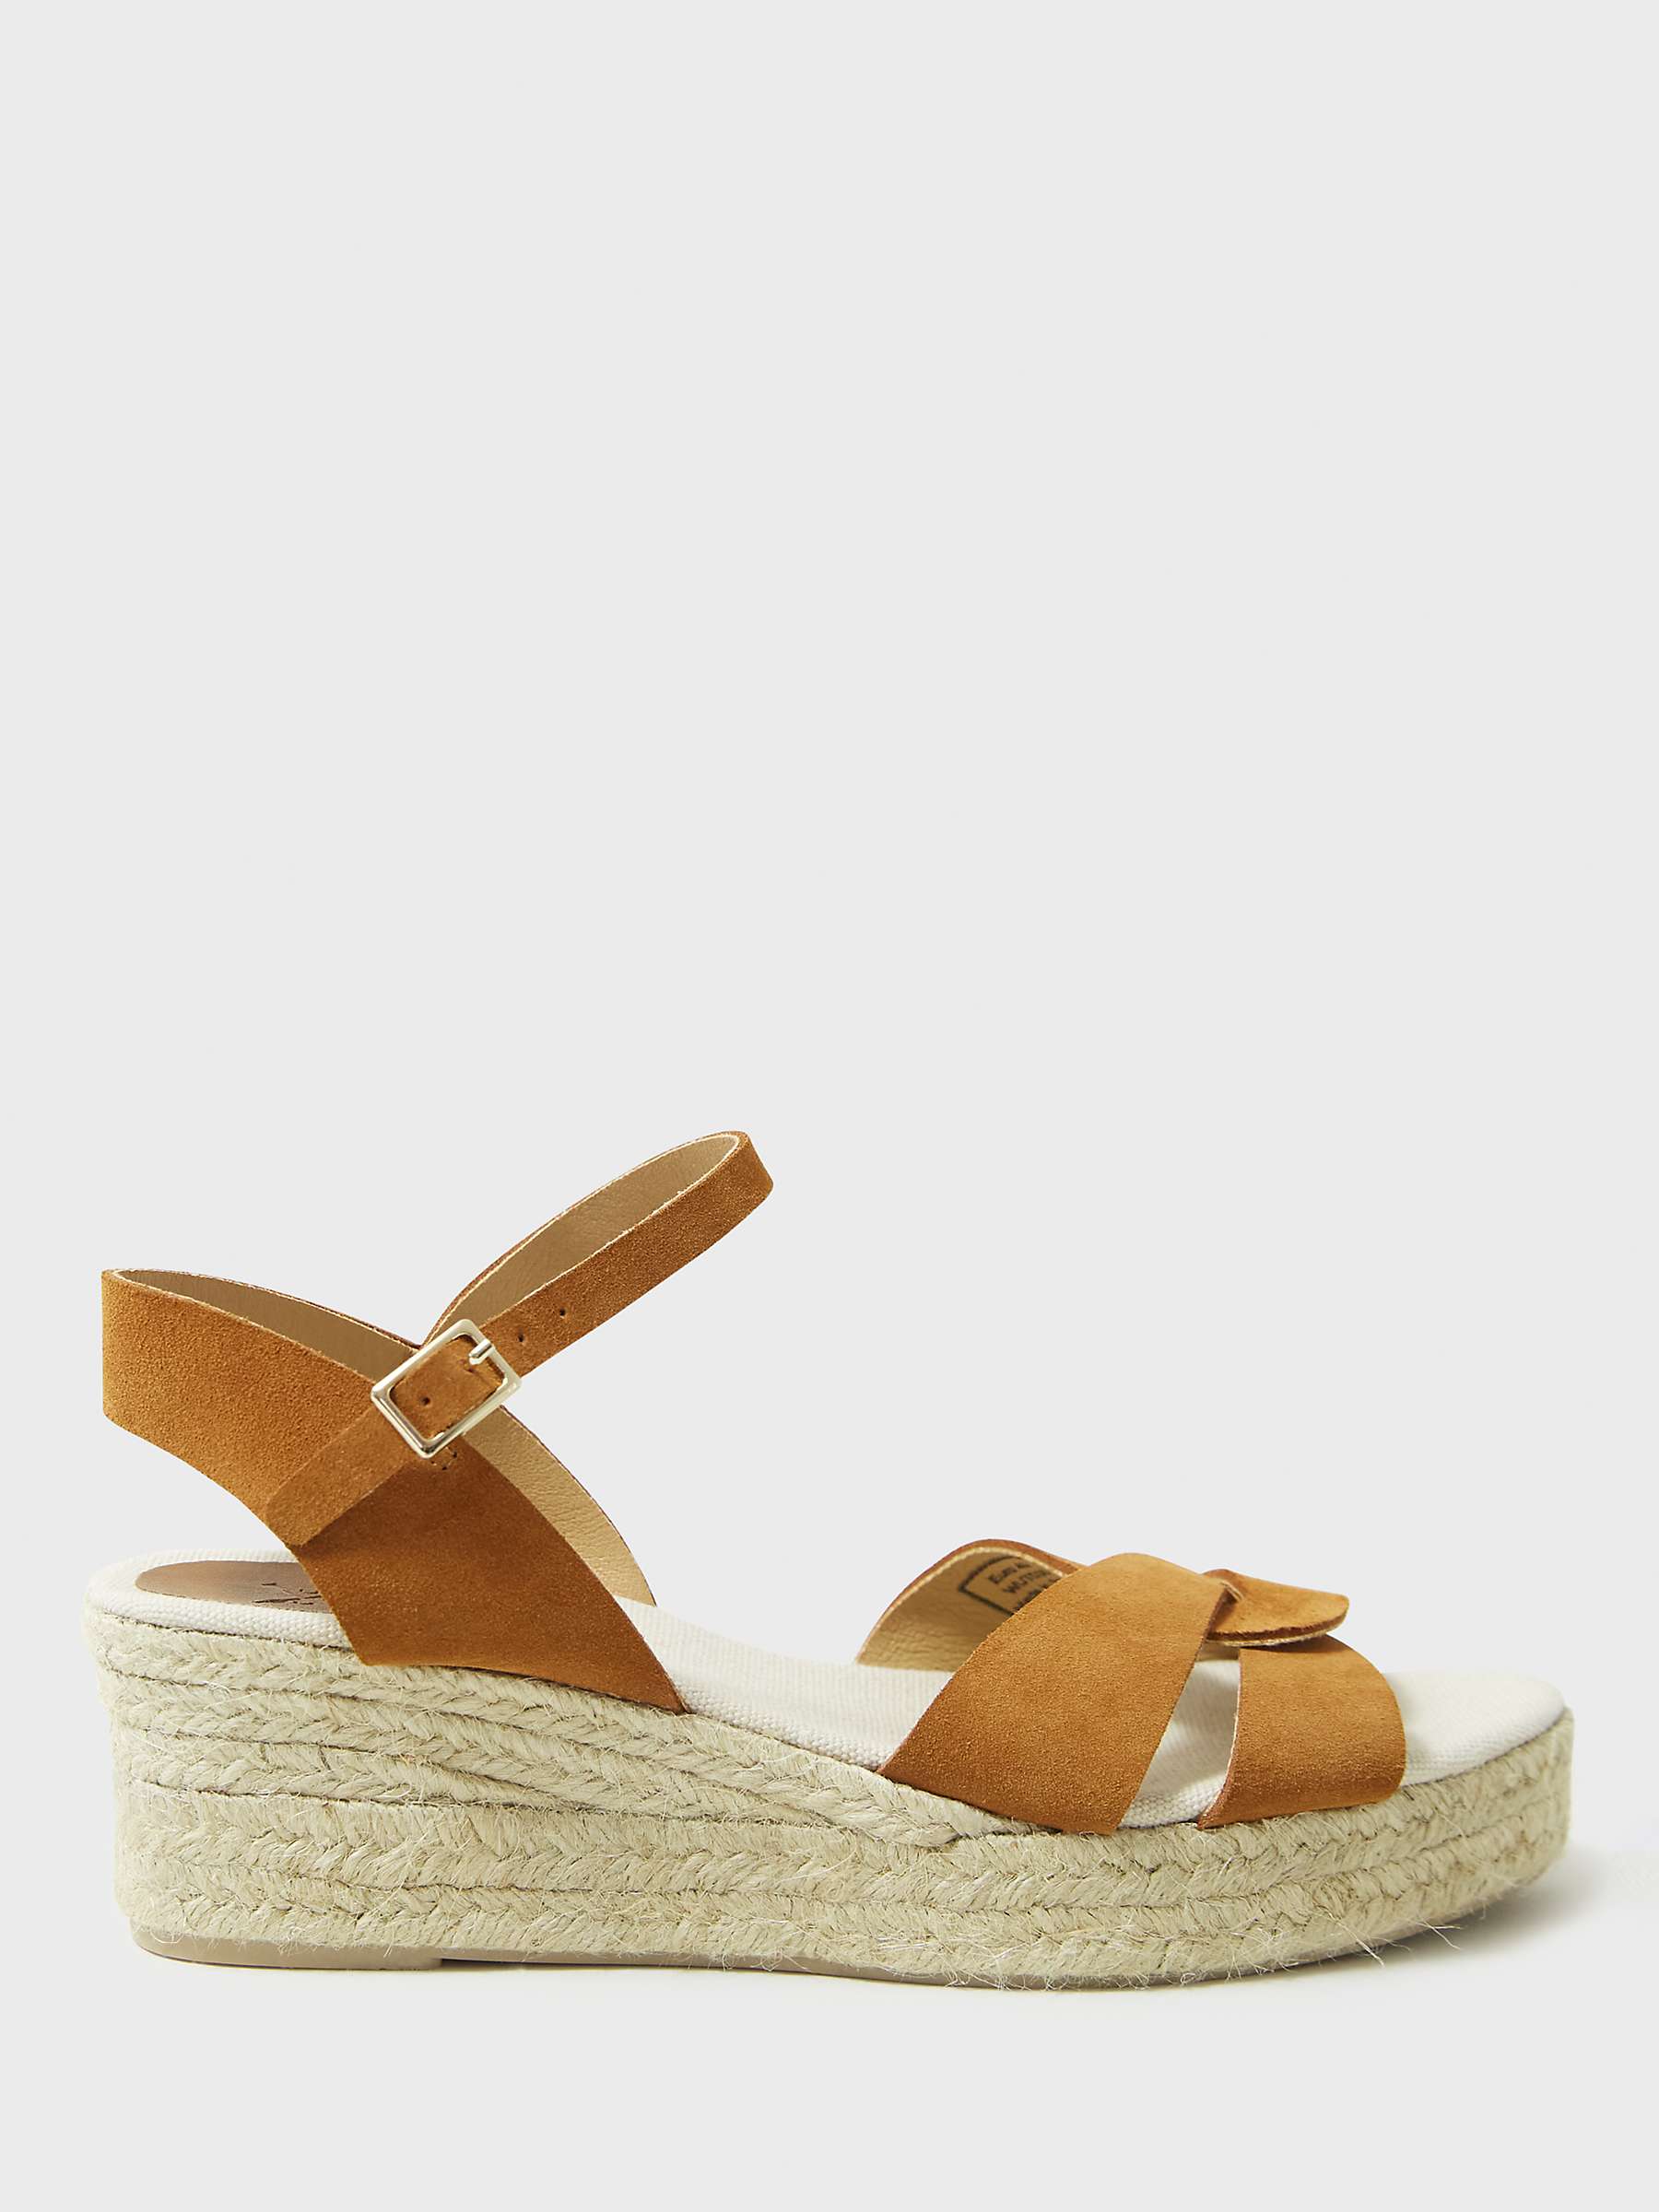 Buy Crew Clothing Suede Sandals, Tan Online at johnlewis.com